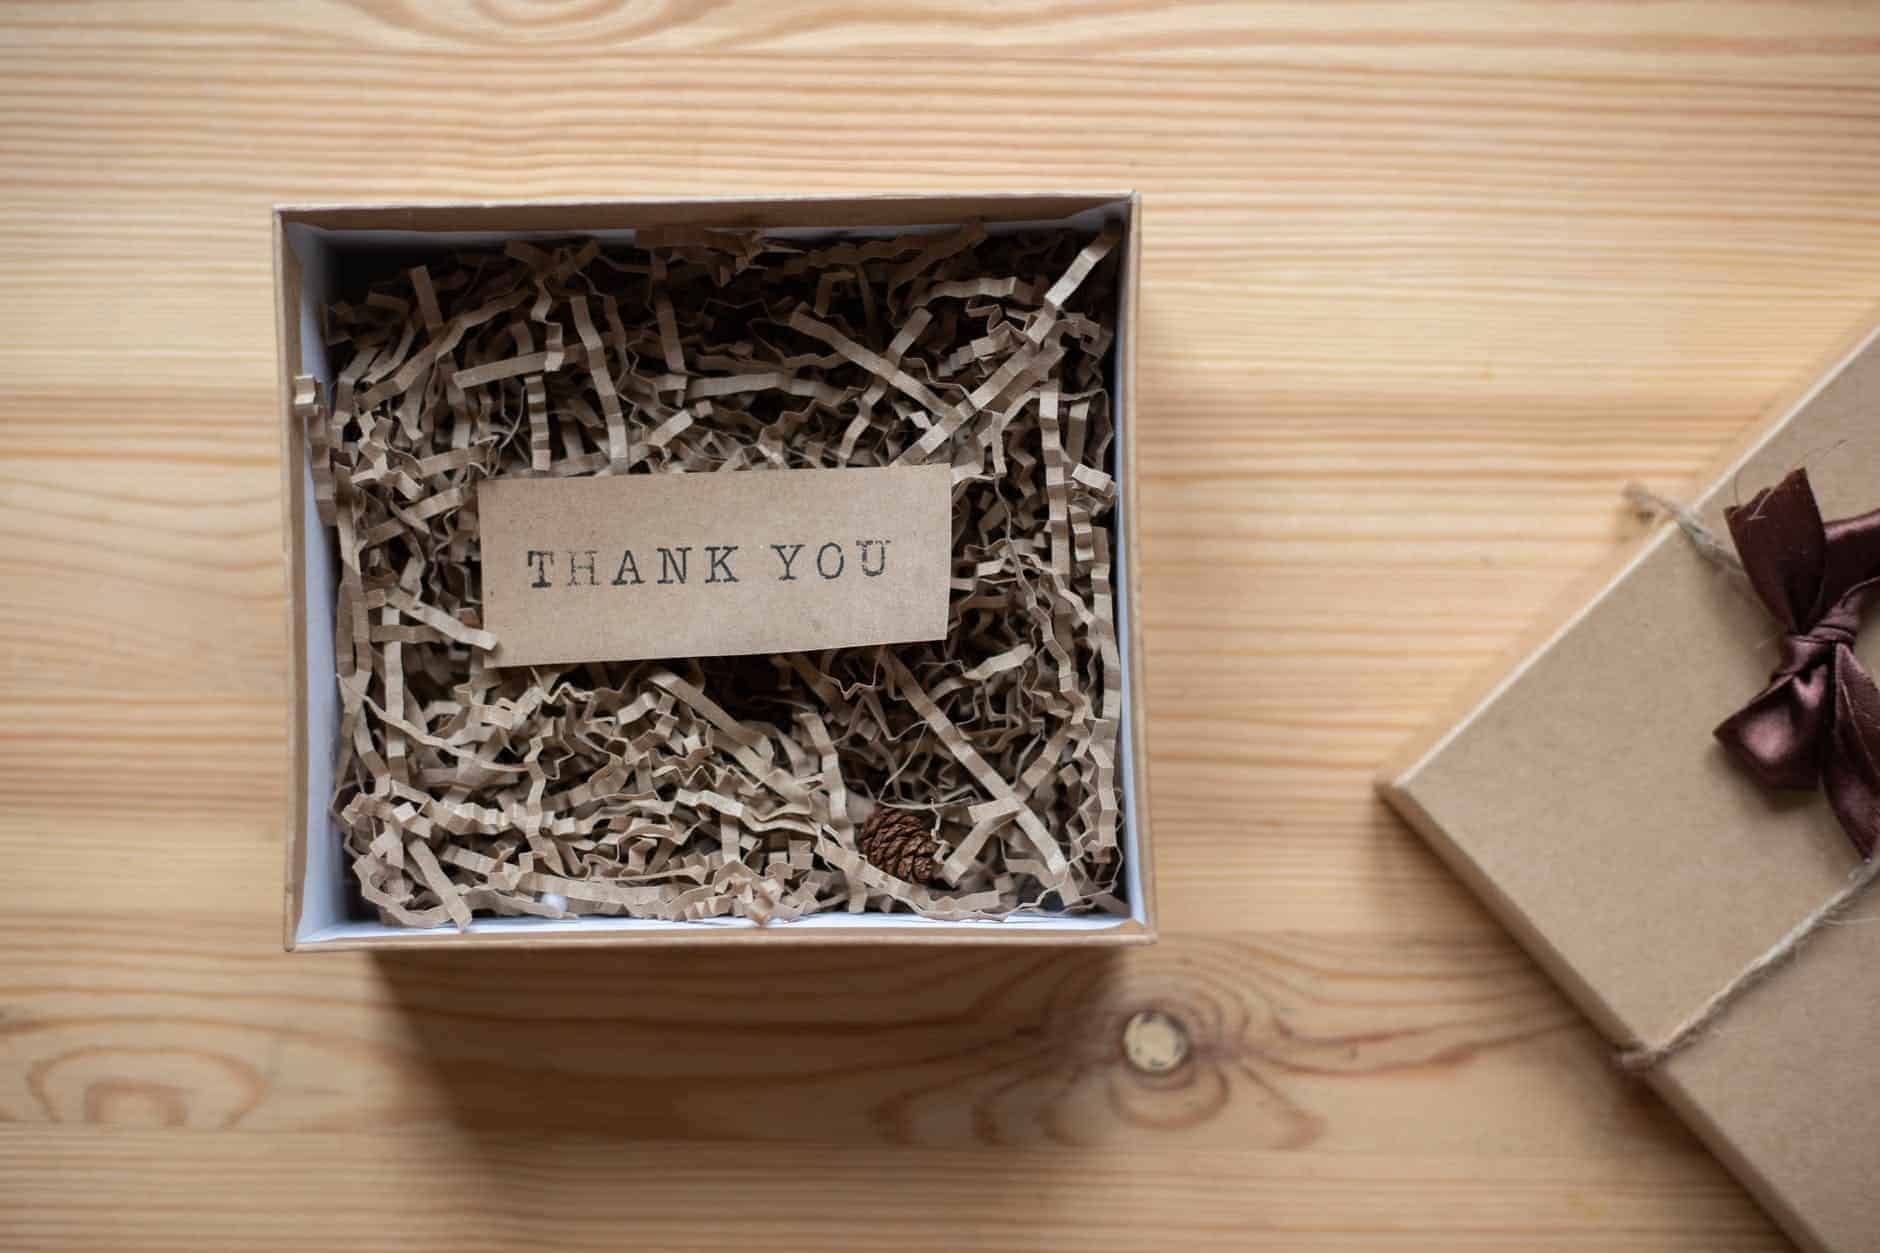 Small open box with a thank you label in it